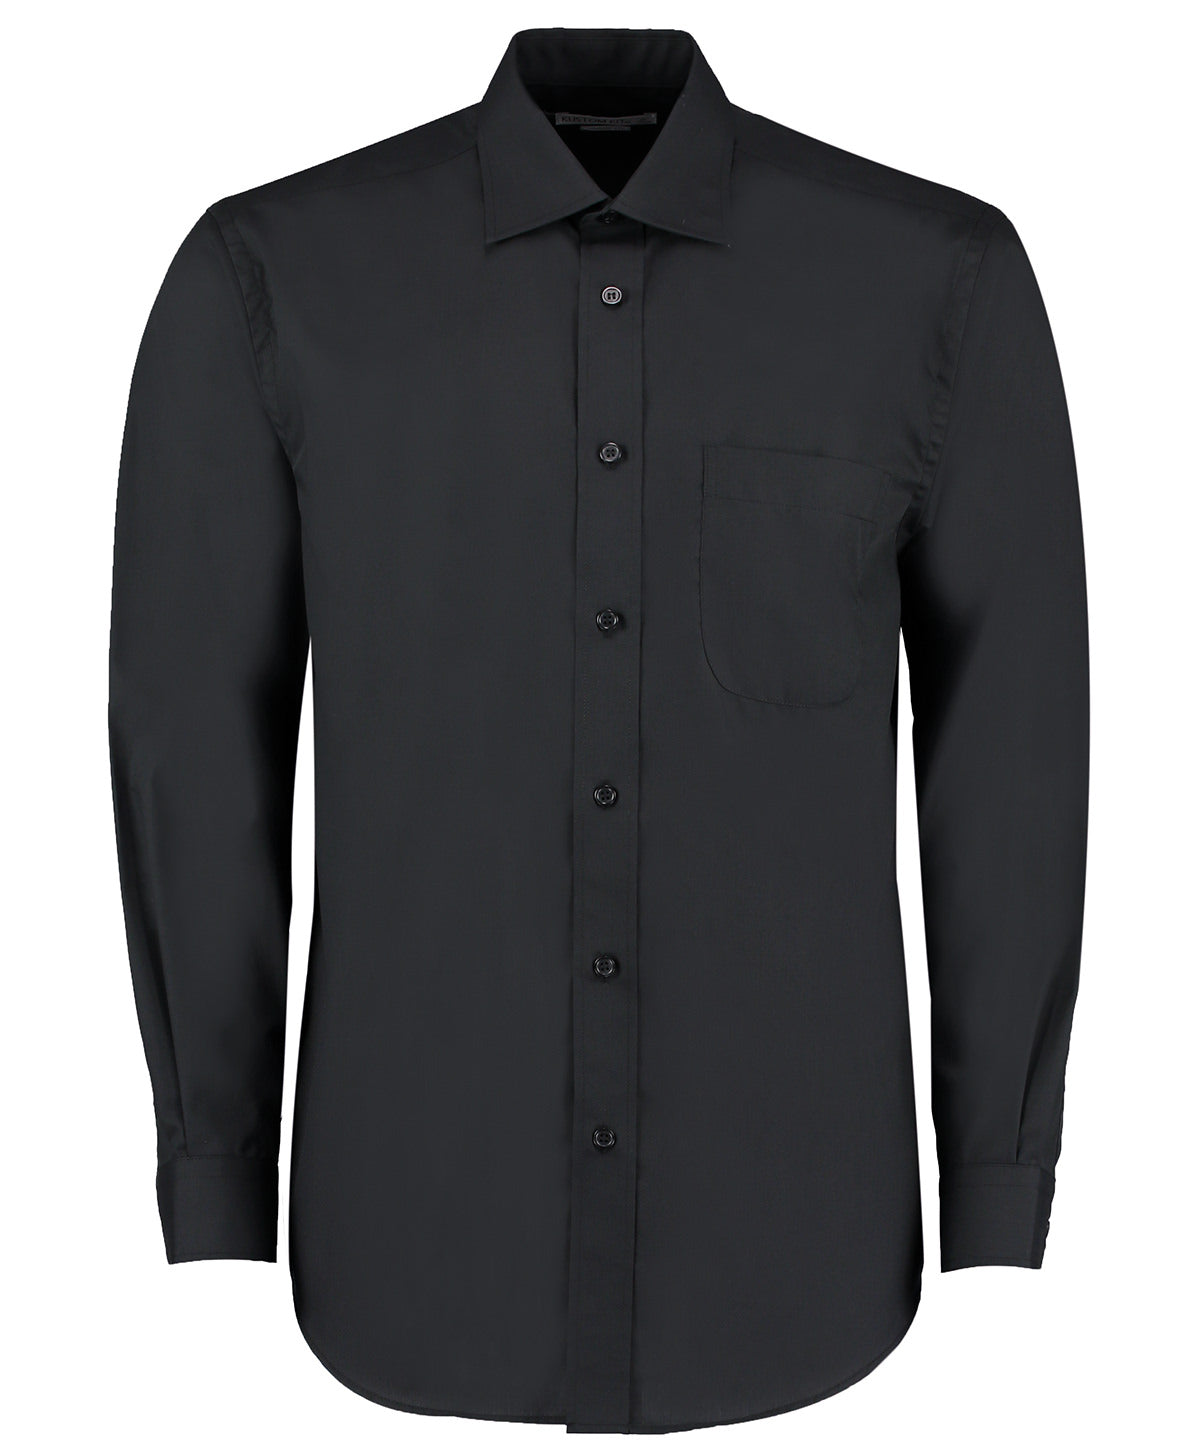 Bolir - Business Shirt Long-sleeved (classic Fit)